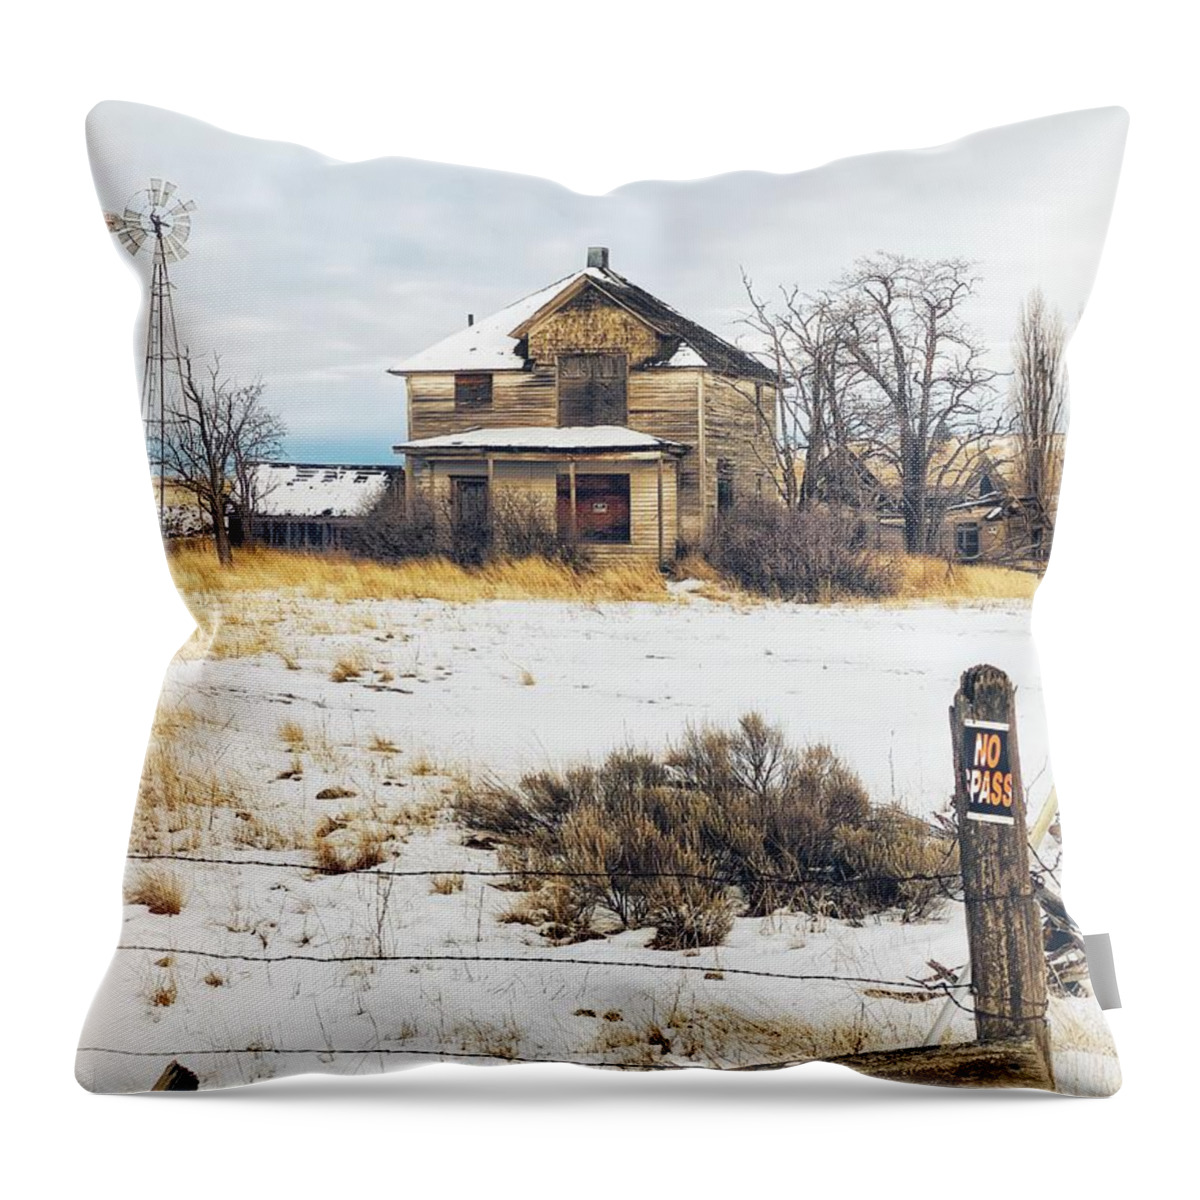 Abandoned Throw Pillow featuring the photograph No Trespassing by Jerry Abbott